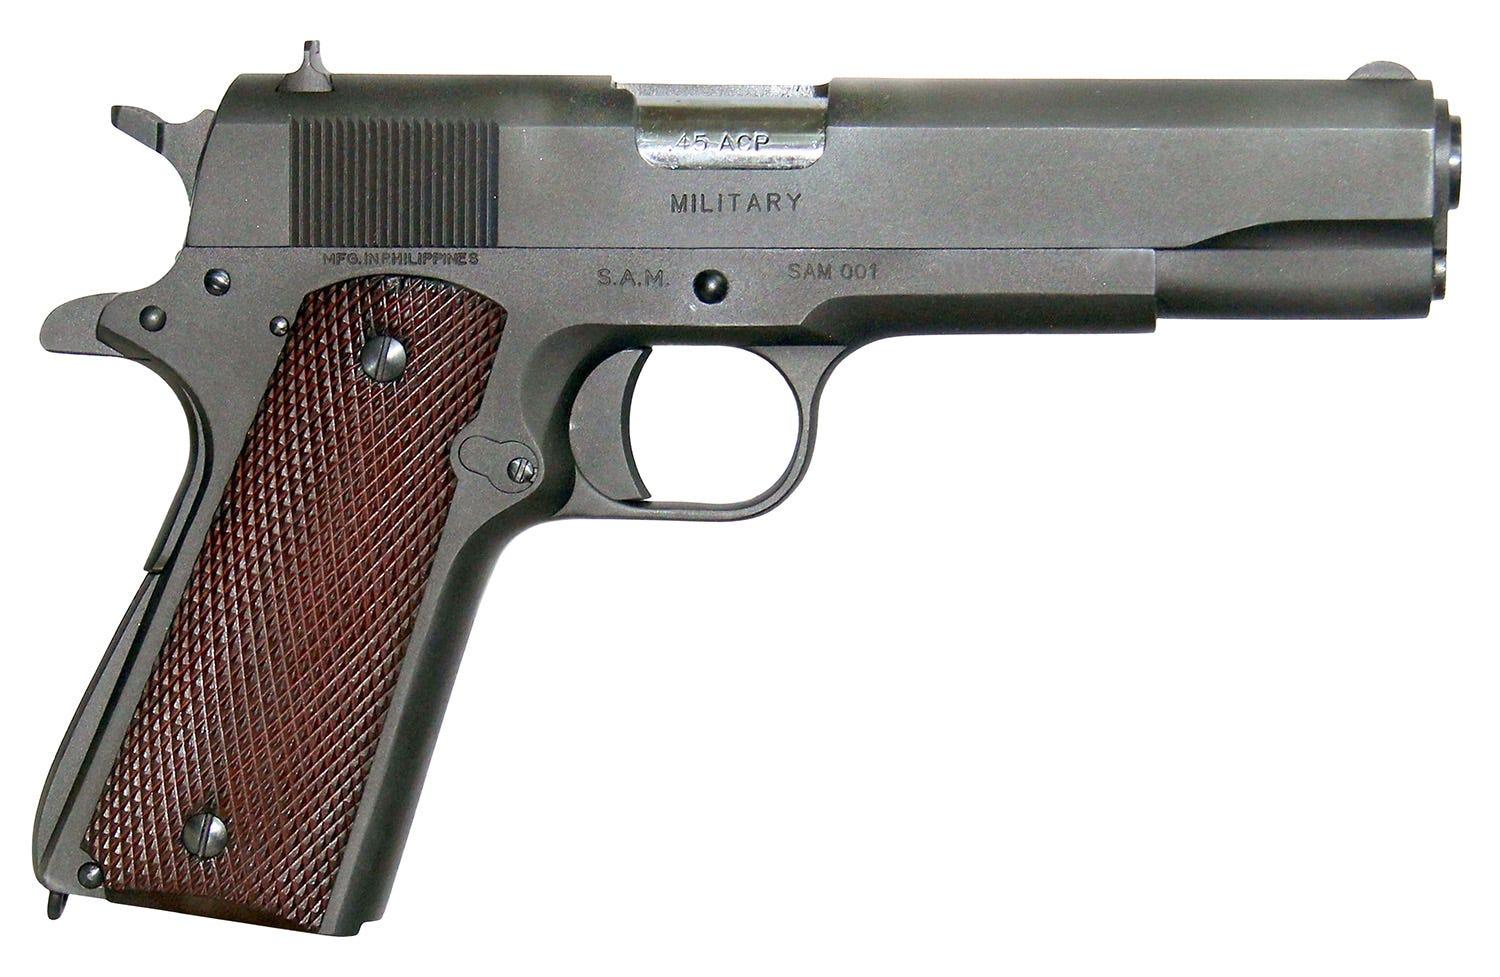 Global Trade Defense Military 1911 .45 ACP 5" Barrel 9-Rounds Wood Grip - $639.99 ($7.99 S/H on Firearms)